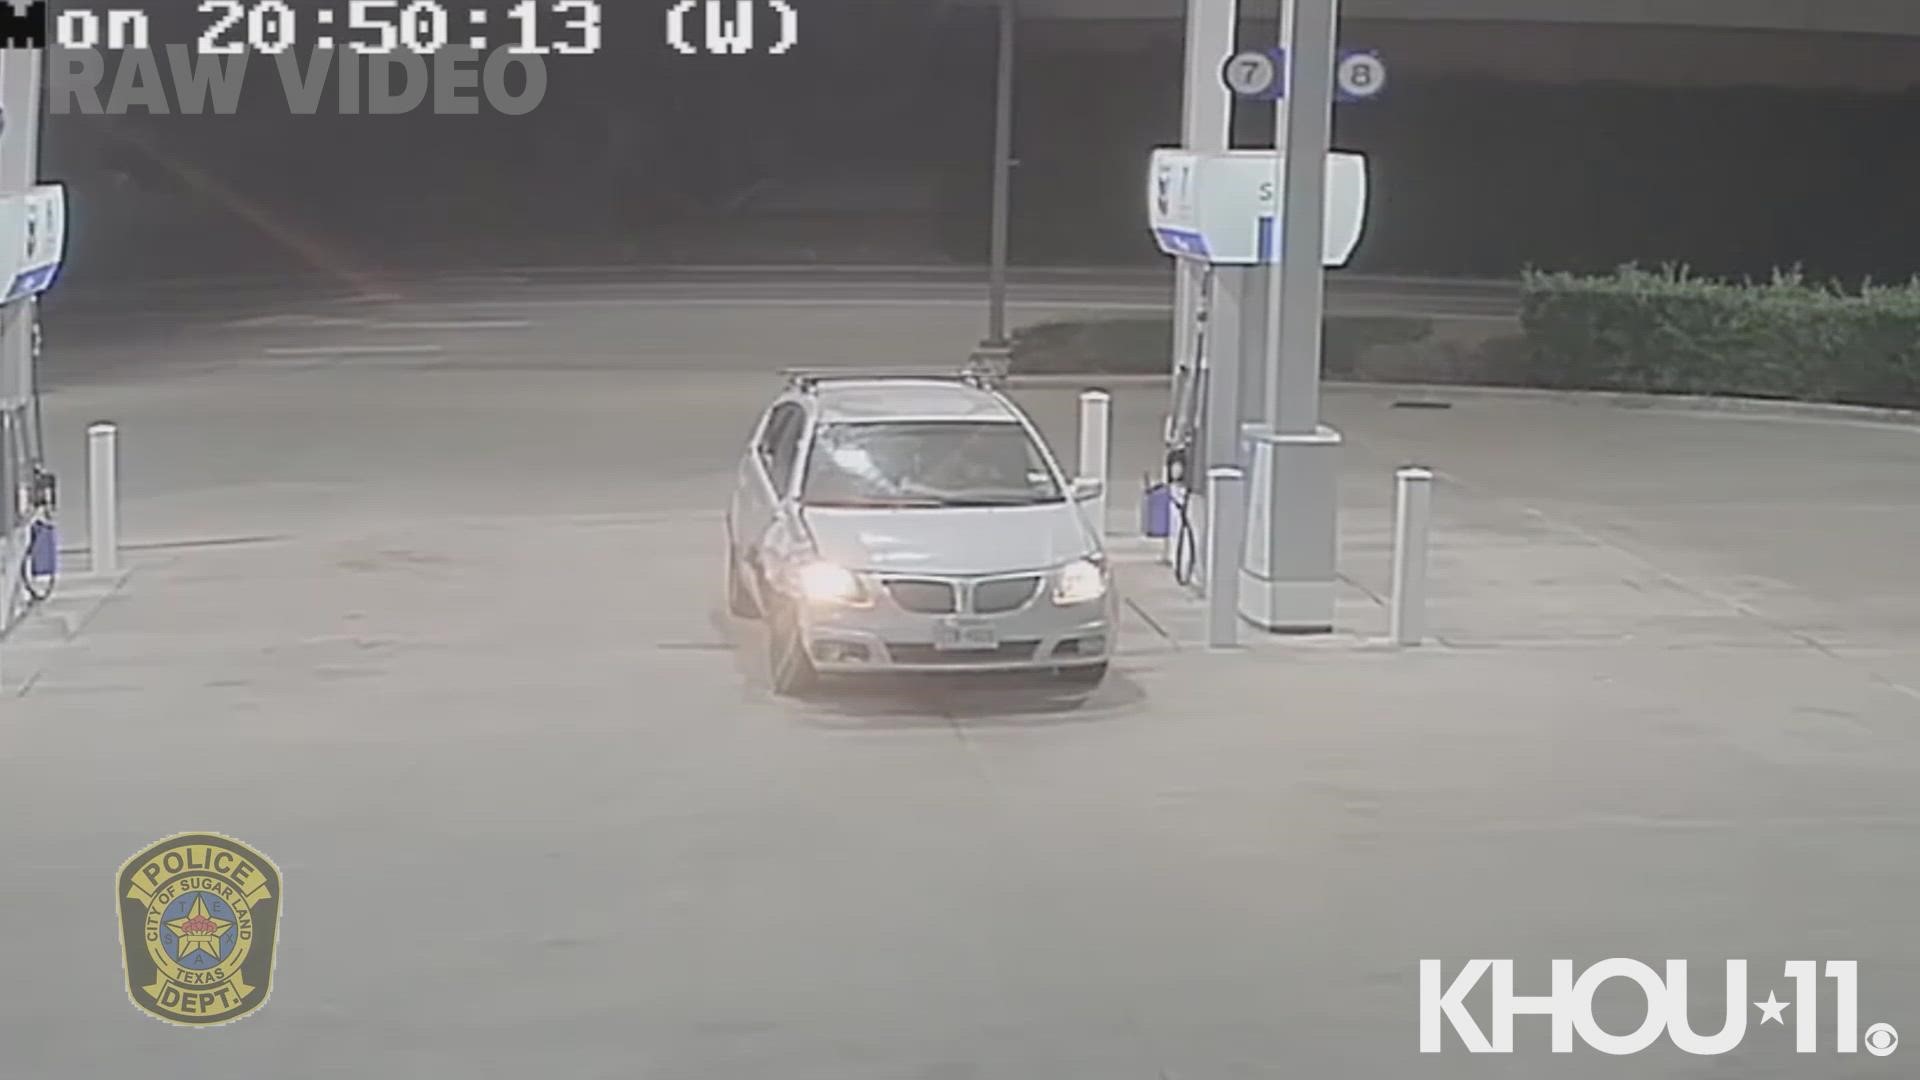 Sugar Land police released surveillance video of a vehicle suspected in a deadly hit-and-run the night of Dec. 20, 2021.